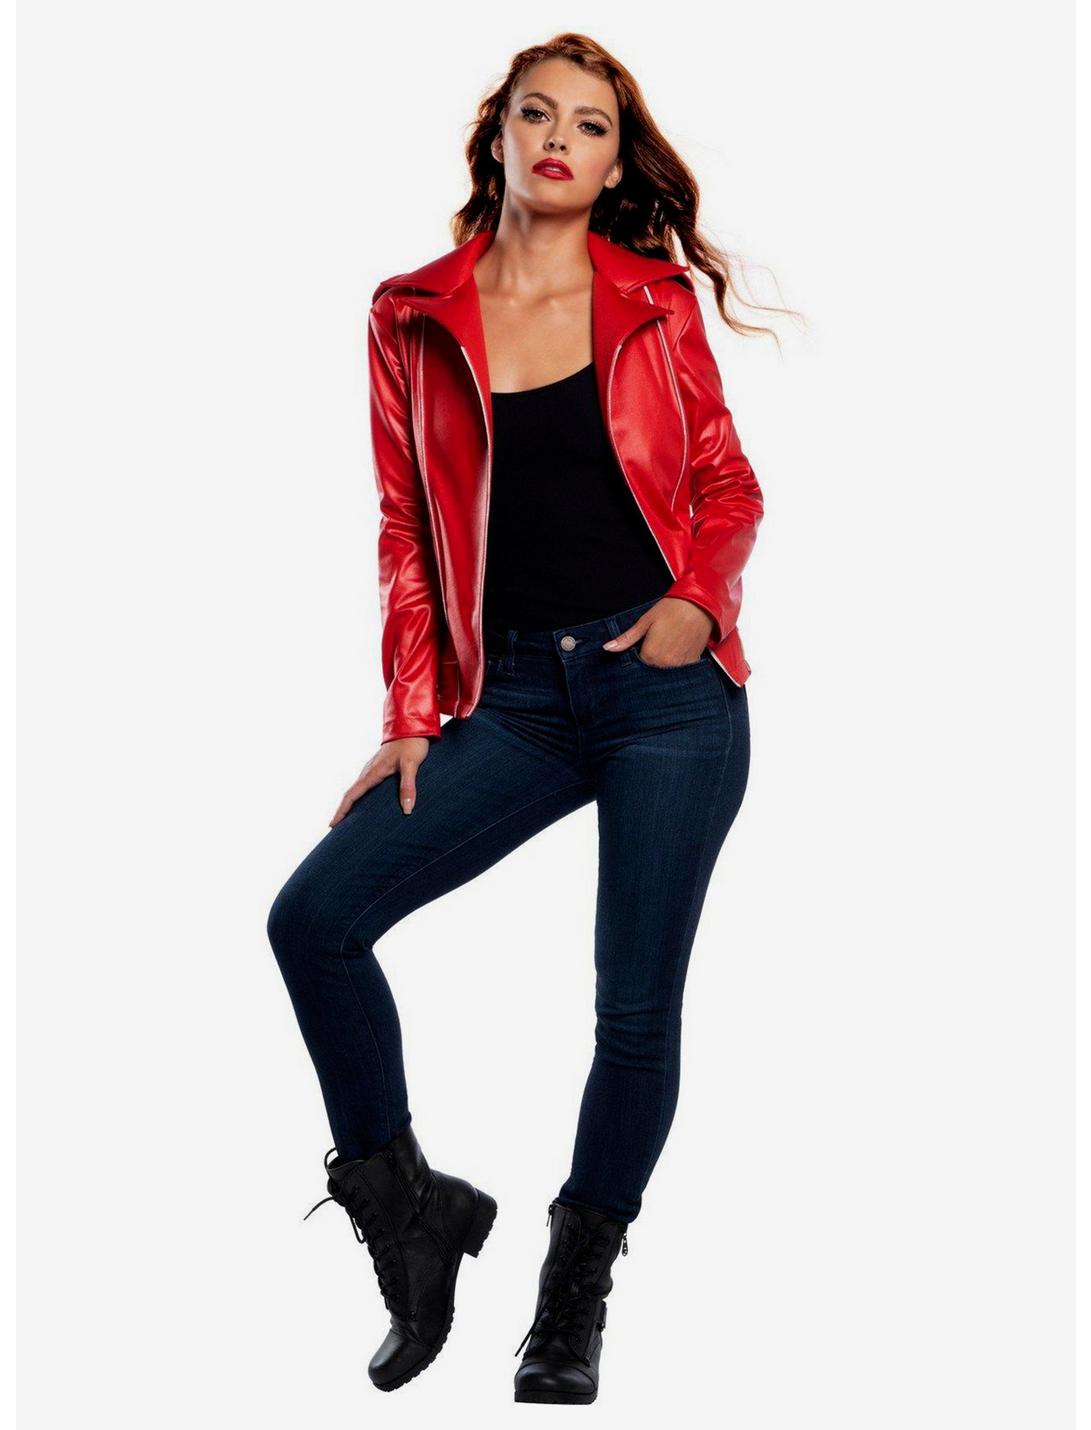 Riverdale Cherry Blossom Serpent Jacket Costume, RED, hi-res